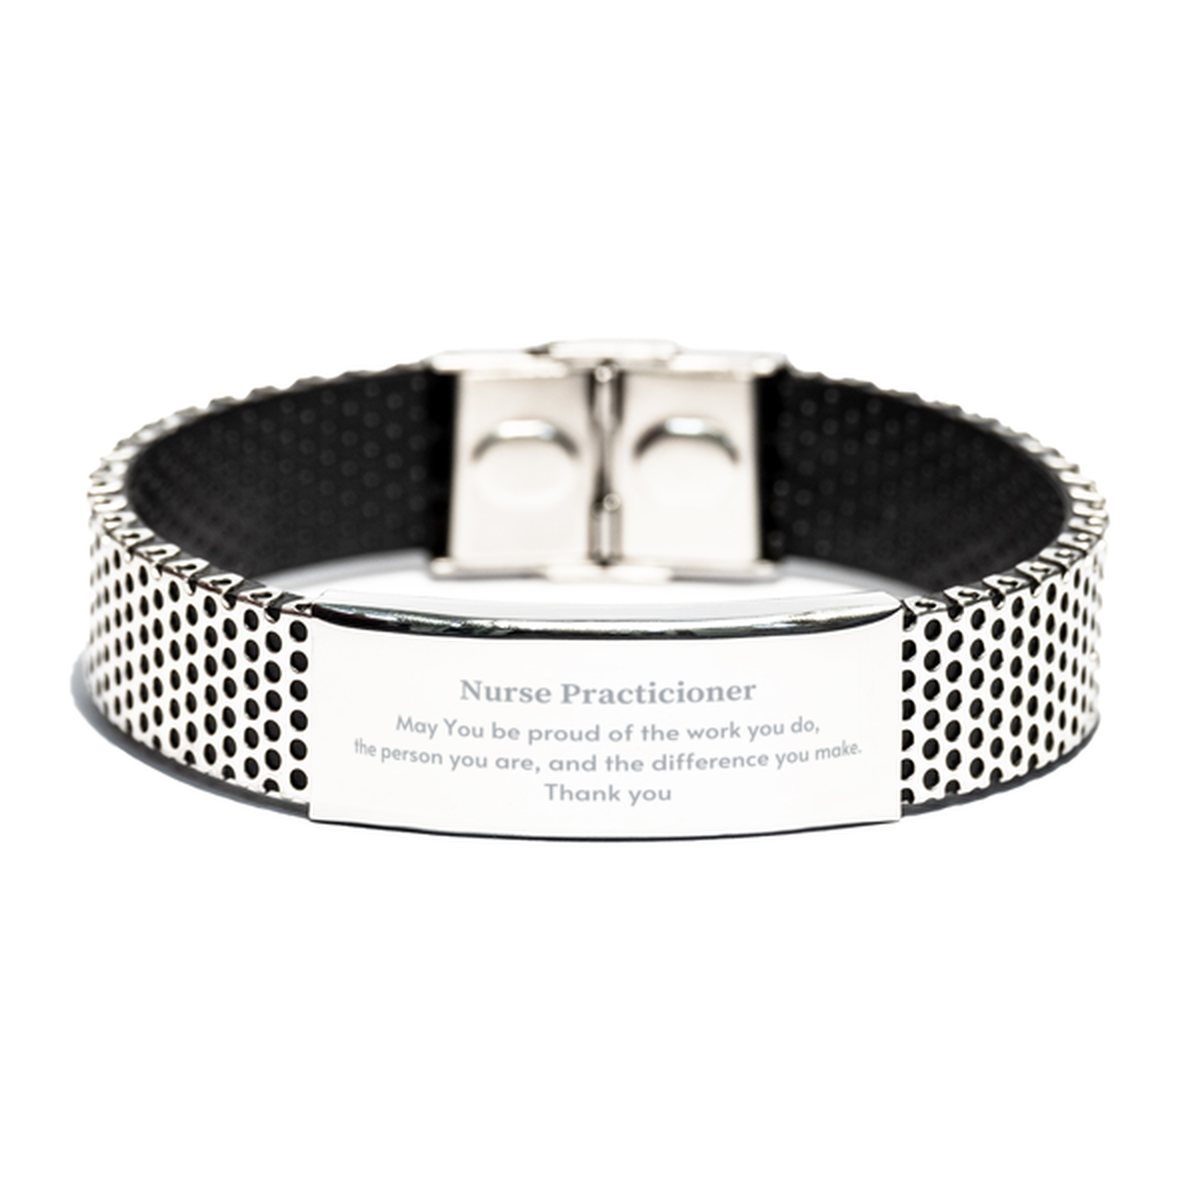 Heartwarming Stainless Steel Bracelet Retirement Coworkers Gifts for Nurse Practicioner, Nurse Practicioner May You be proud of the work you do, the person you are Gifts for Boss Men Women Friends